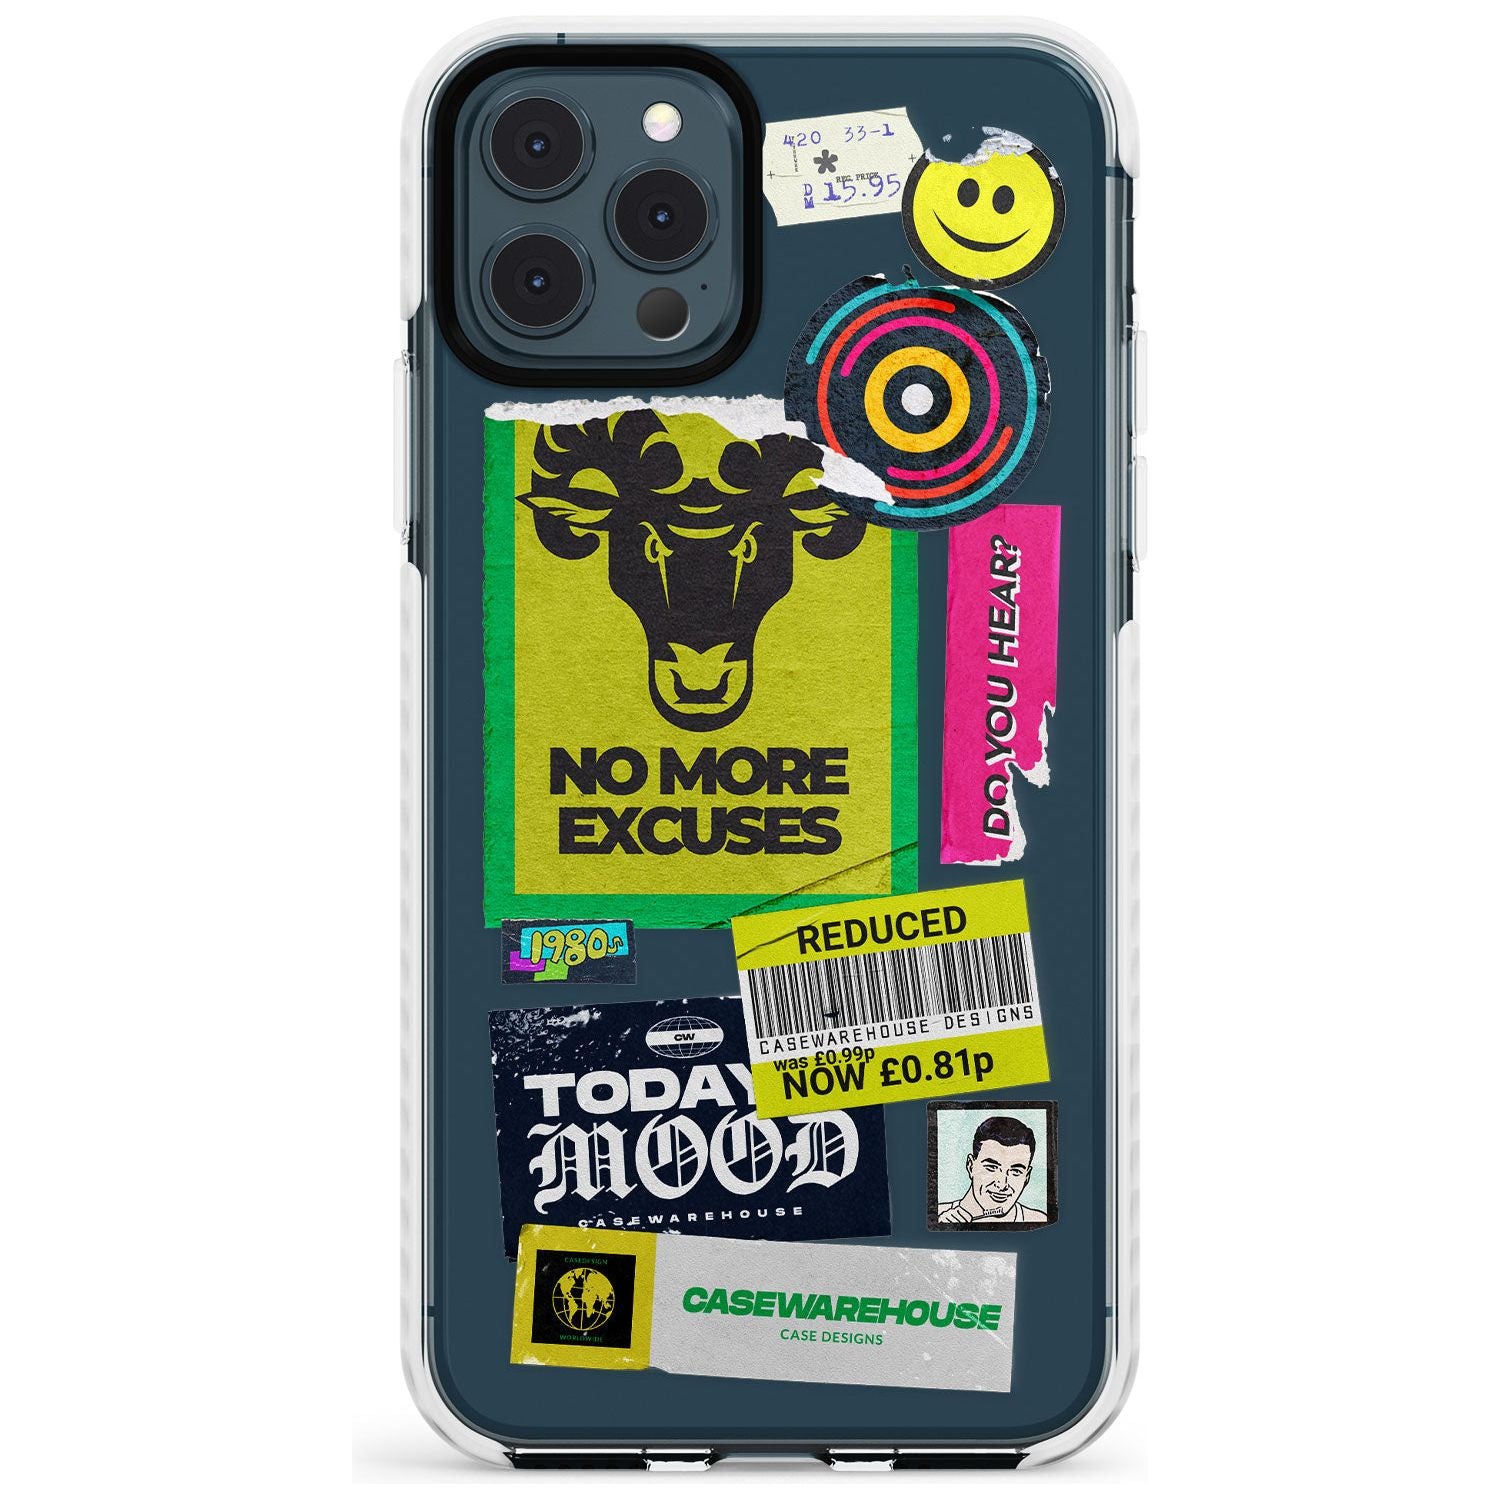 No More Excuses Sticker Mix Slim TPU Phone Case for iPhone 11 Pro Max